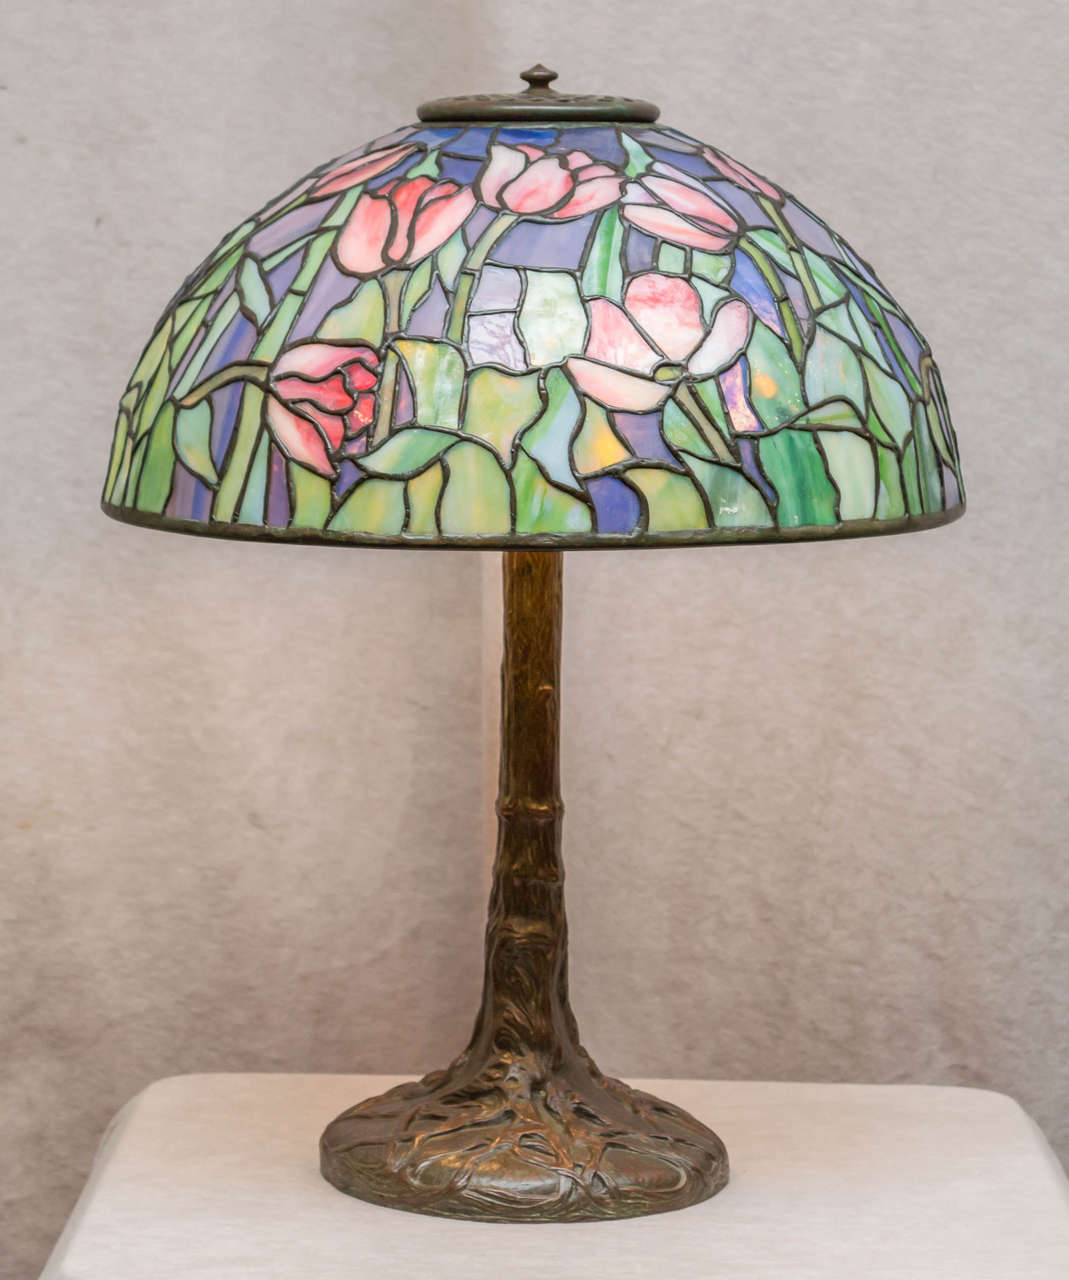 A very colorful and desirable example of an original Tiffany. Both shade and base are properly signed. The shade has some wonderful colors as any eye can see. The bronze base is the tree trunk style and one Of Tiffany Studios most exotic and